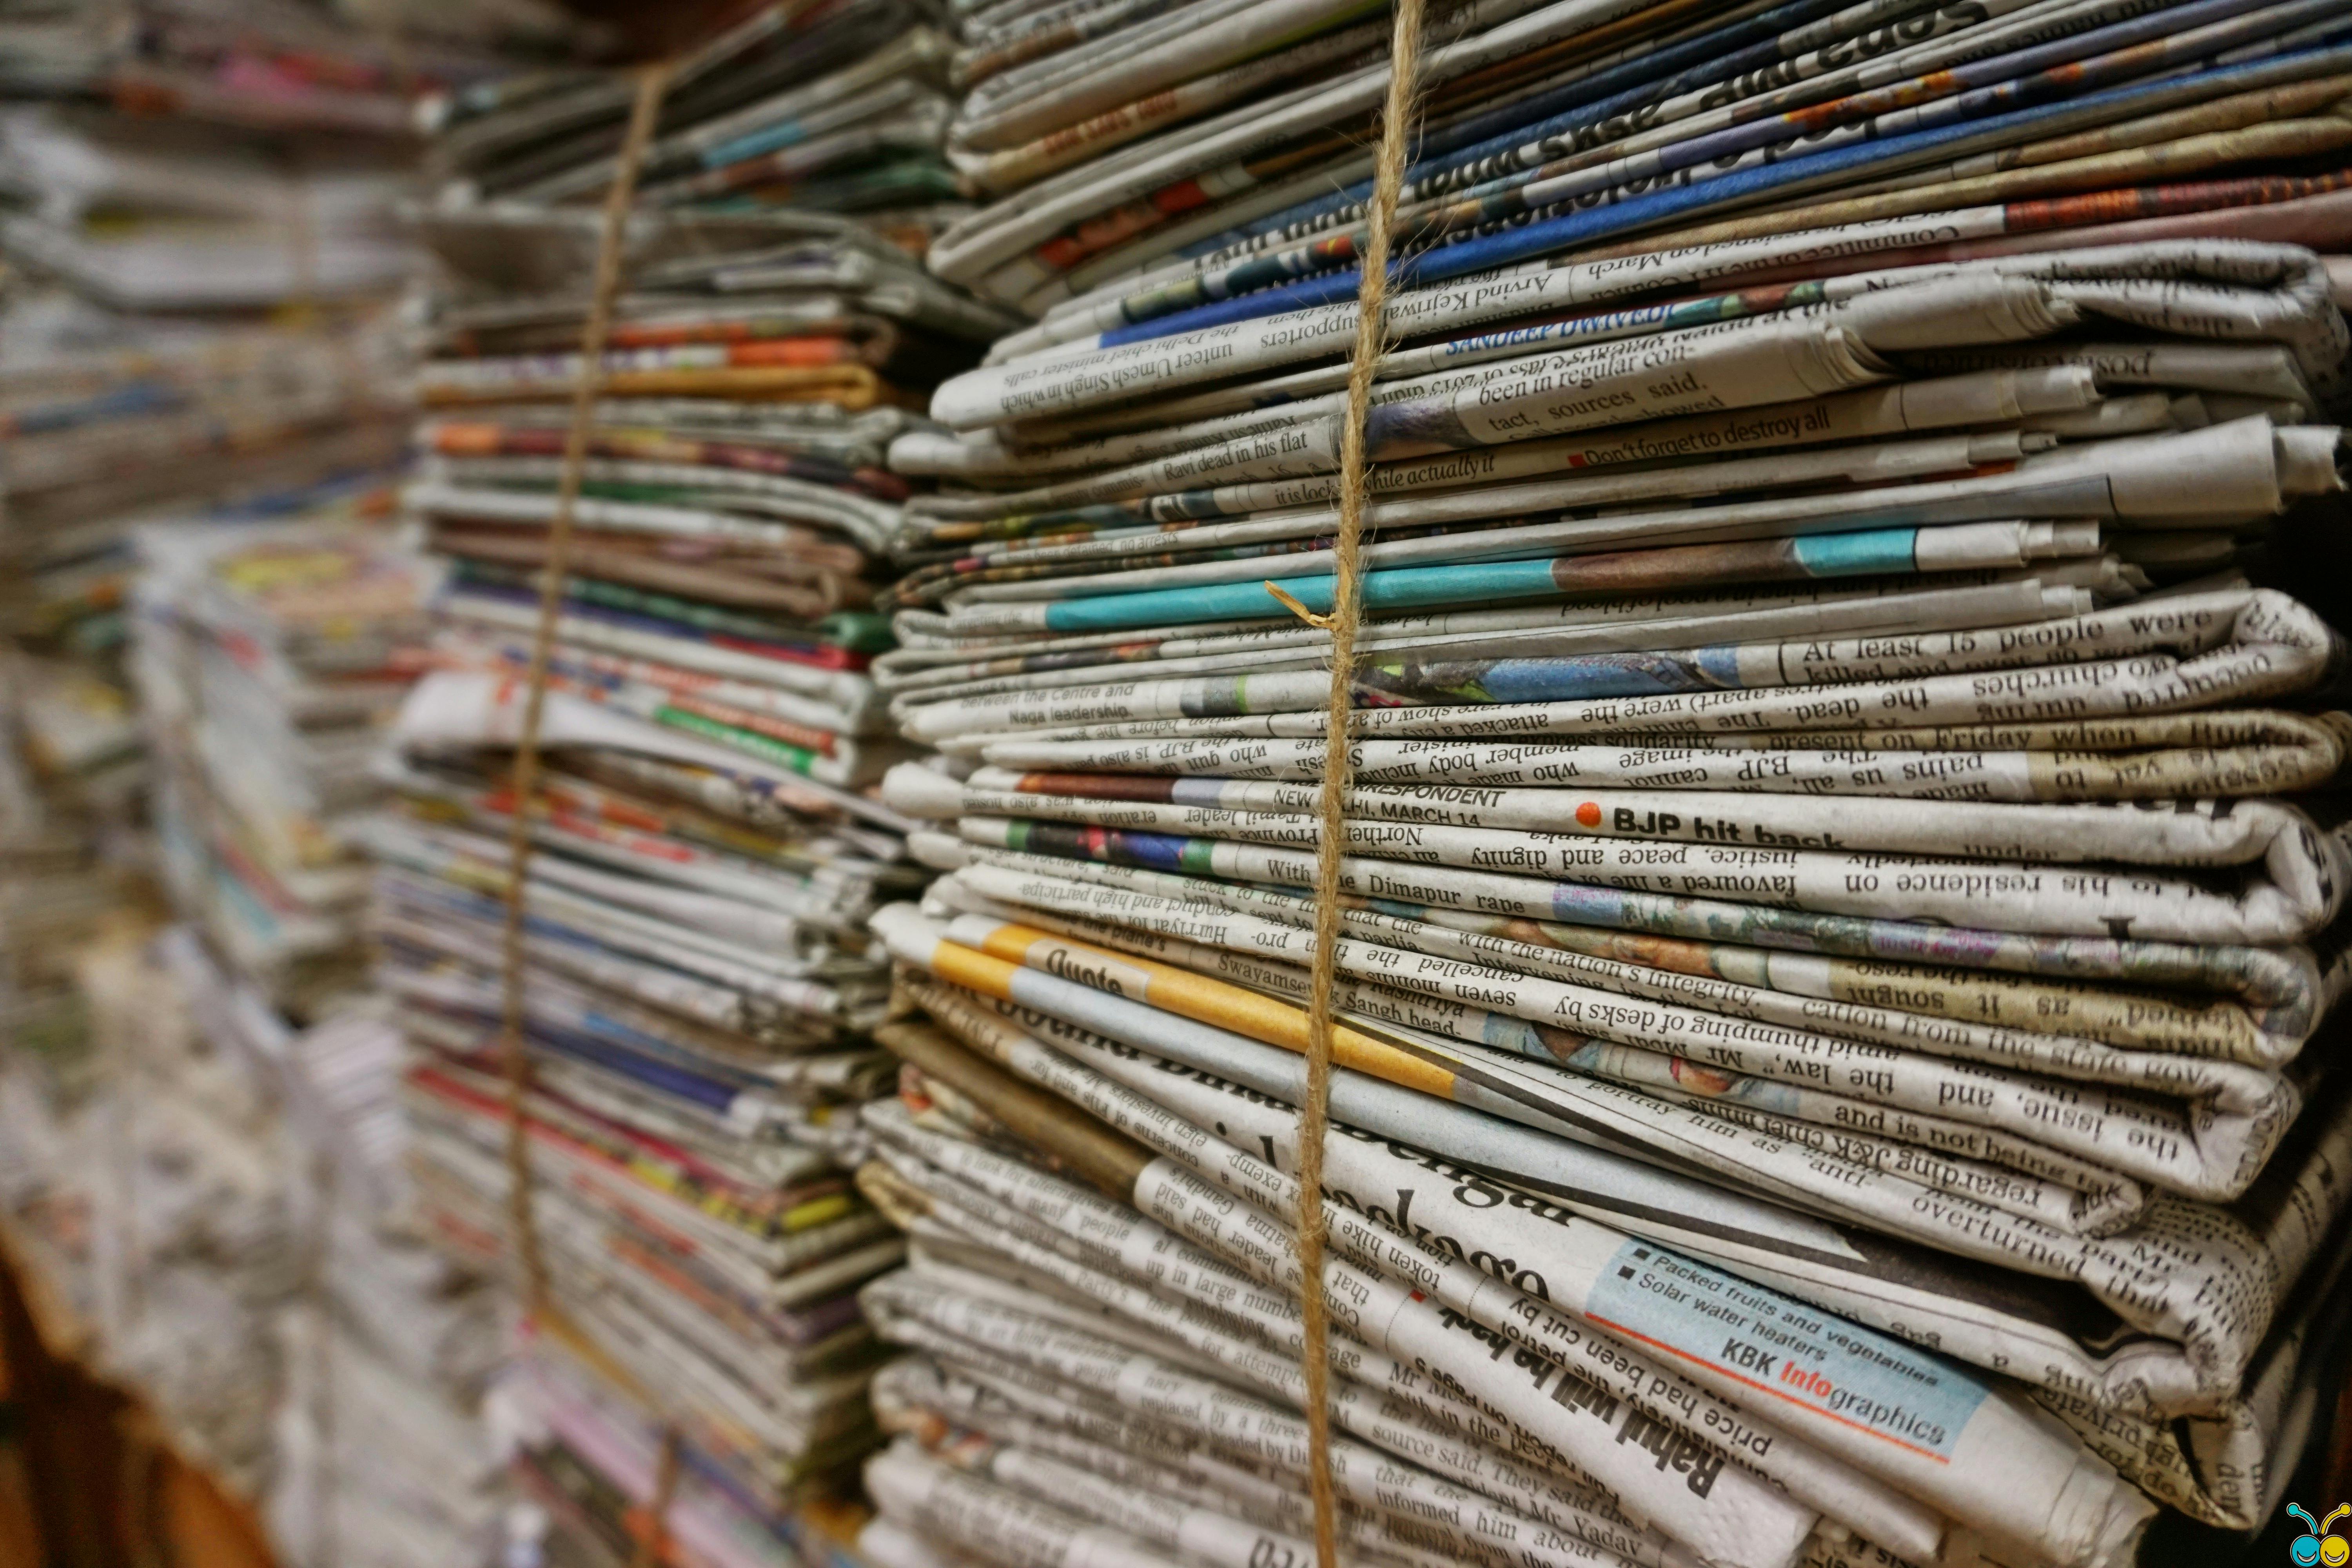 The capabilities of internet distribution broke the business model of the “bundled newspaper”. : pexels.com https://www.pexels.com/terms-of-service/